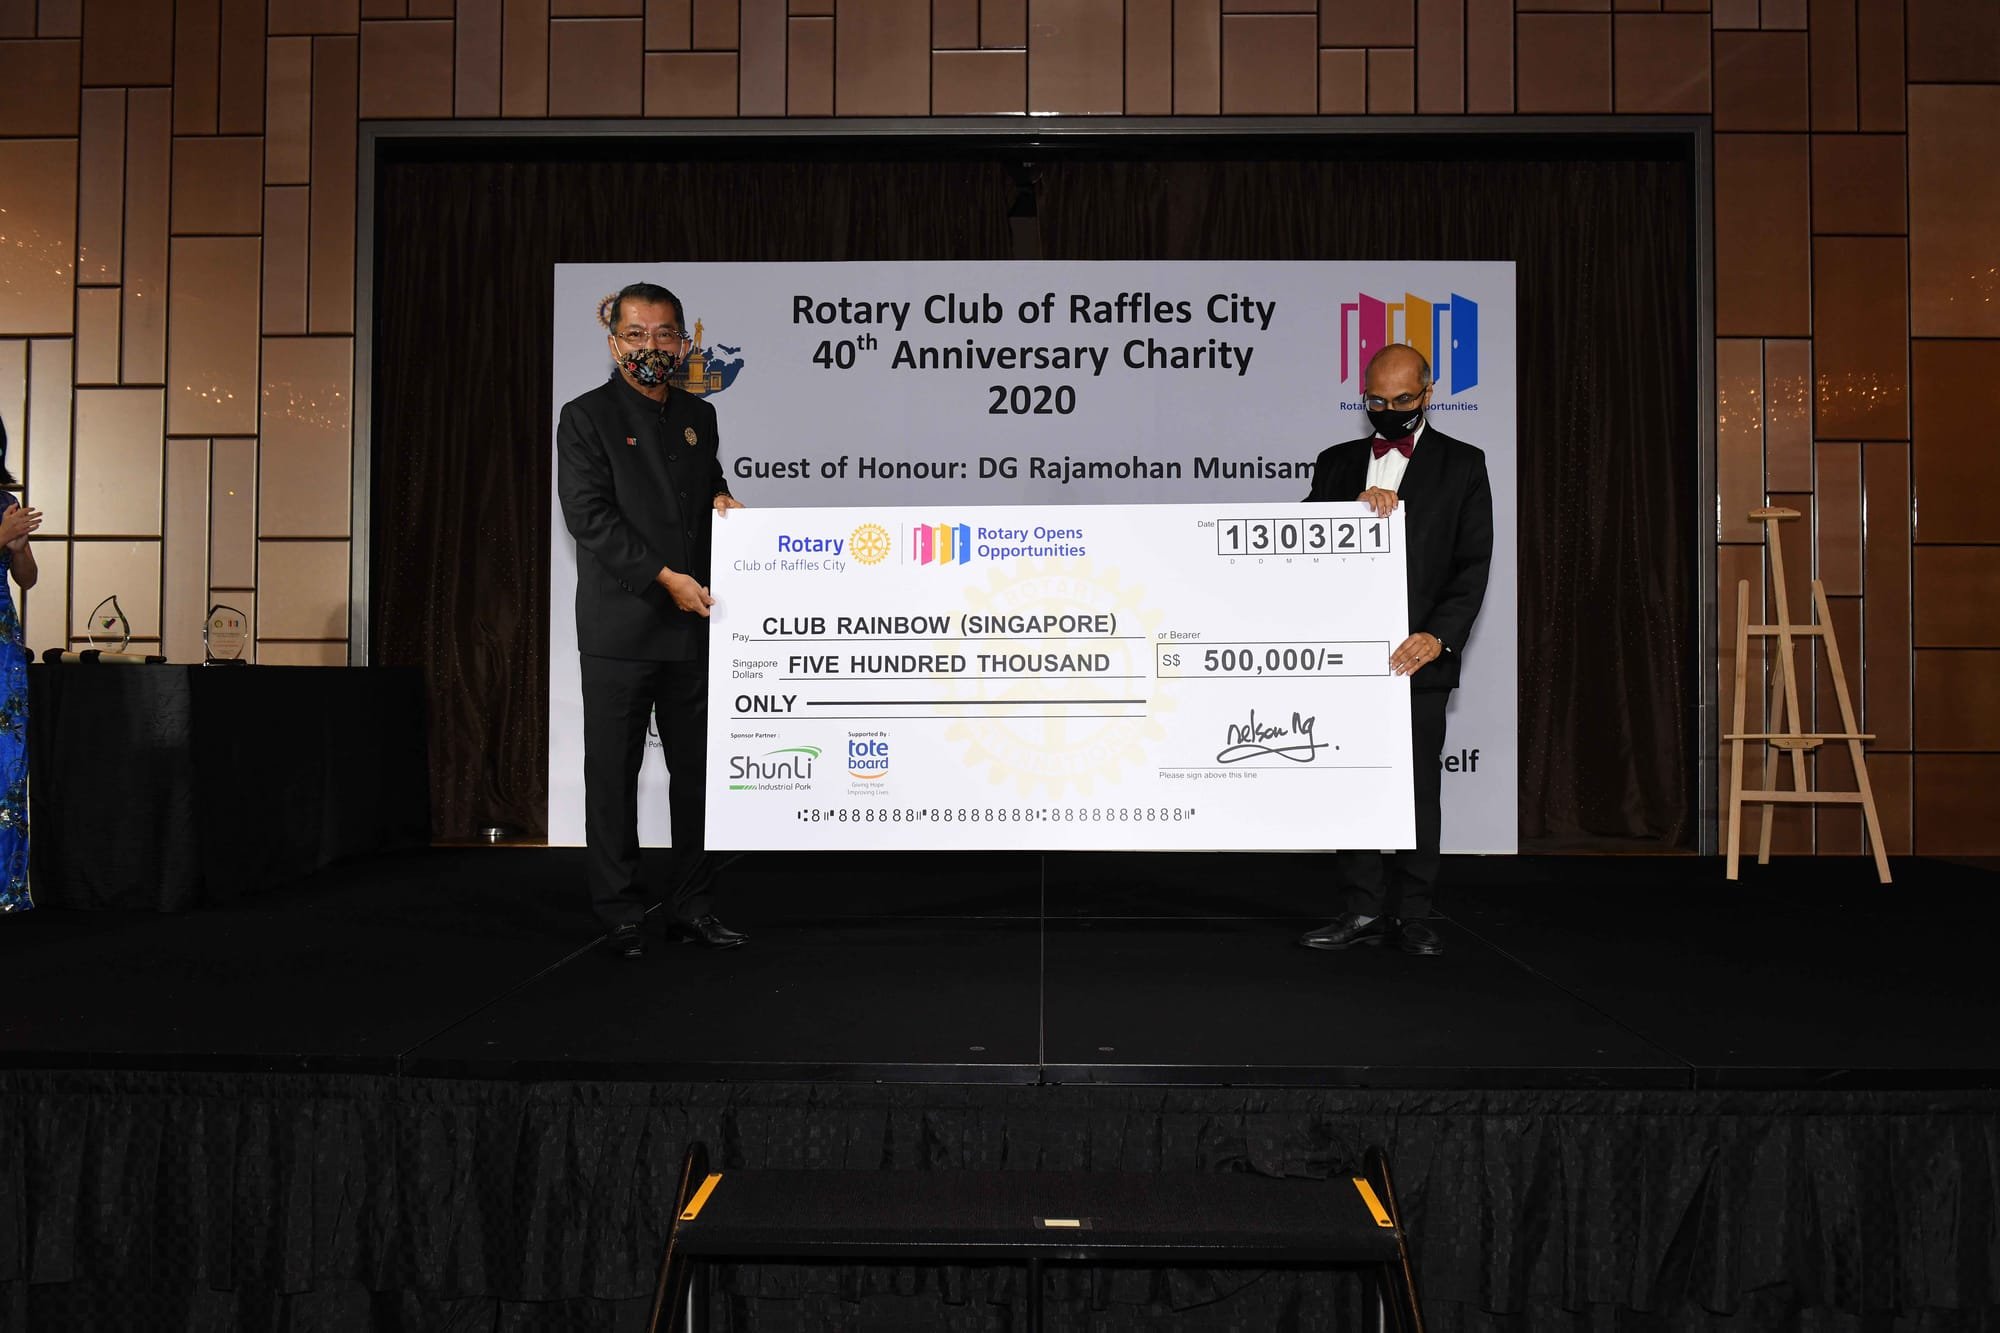 2020-2021 Major Project: $500,000 Fundraised for Club Rainbow